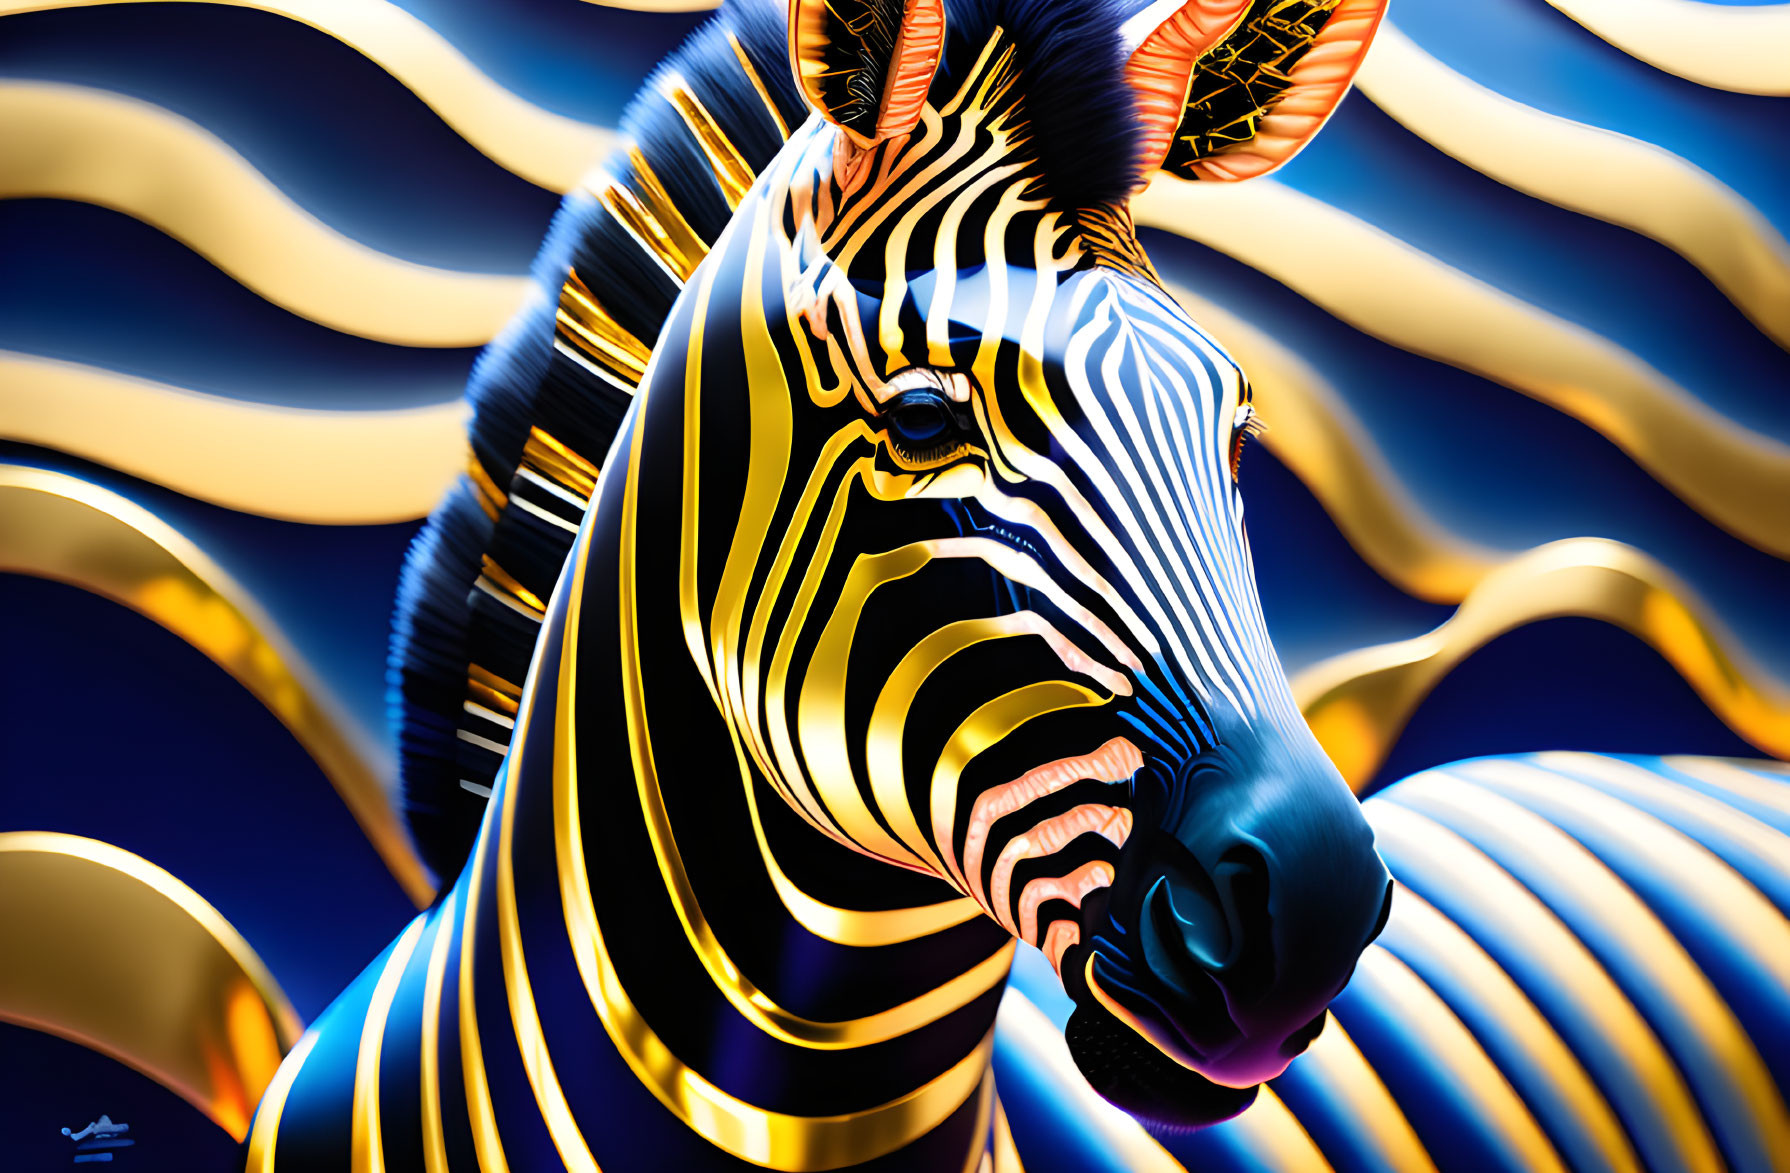 Striking Fusion of Zebra and Artistic Styles